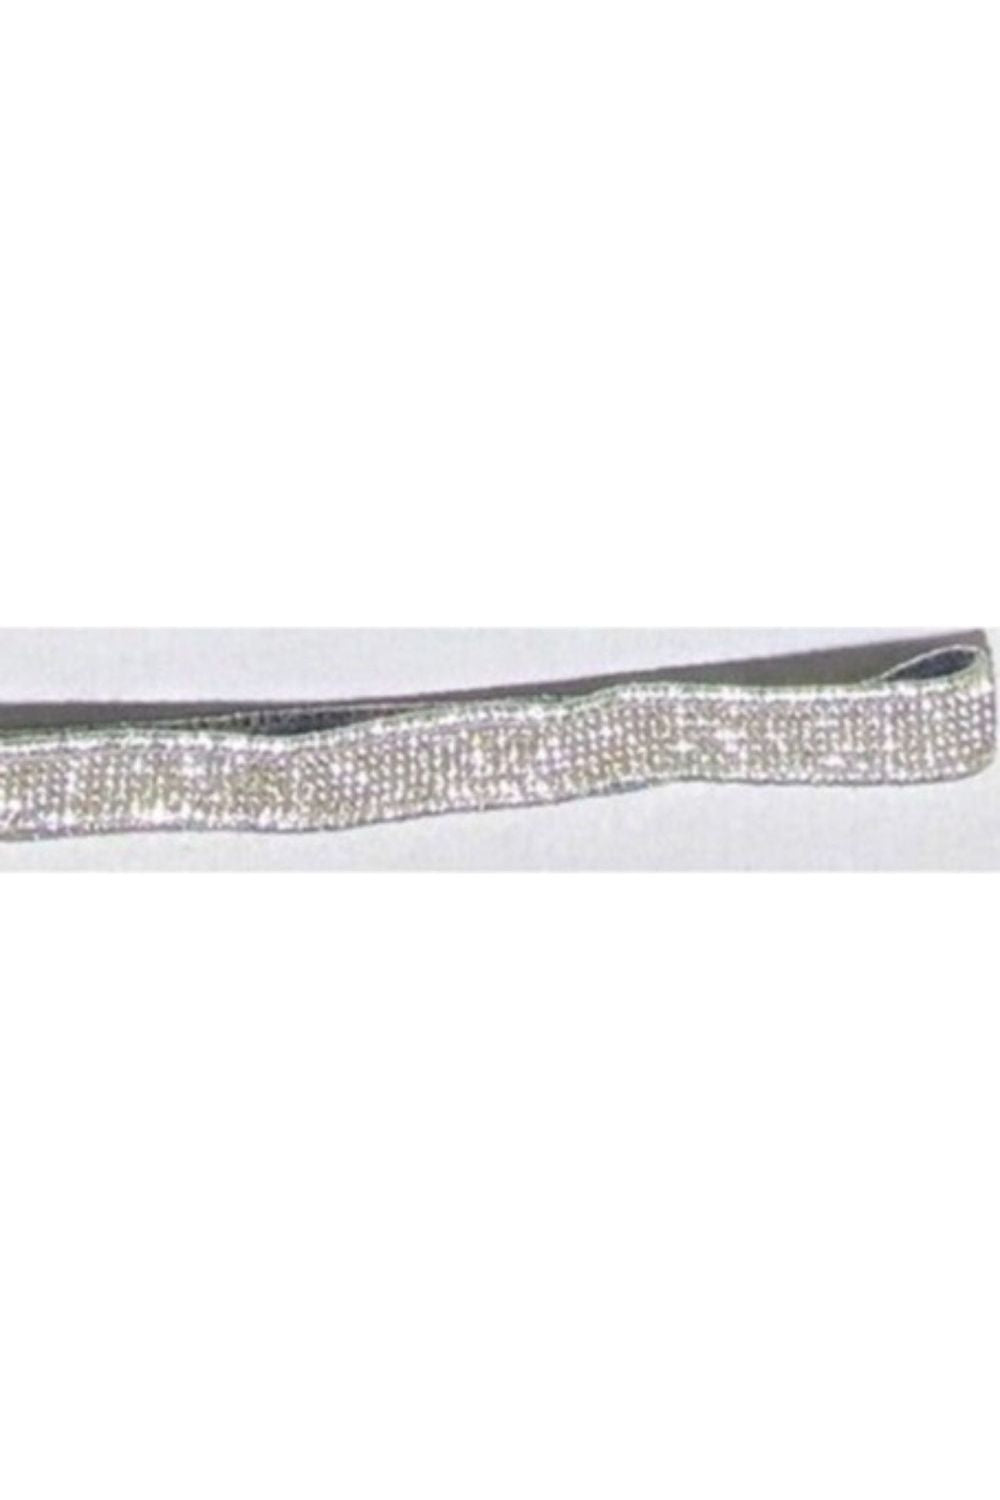 1" Luxury Velvet Jeweled Ribbon: Silver (5 Yards) - Michelle's aDOORable Creations - Garland